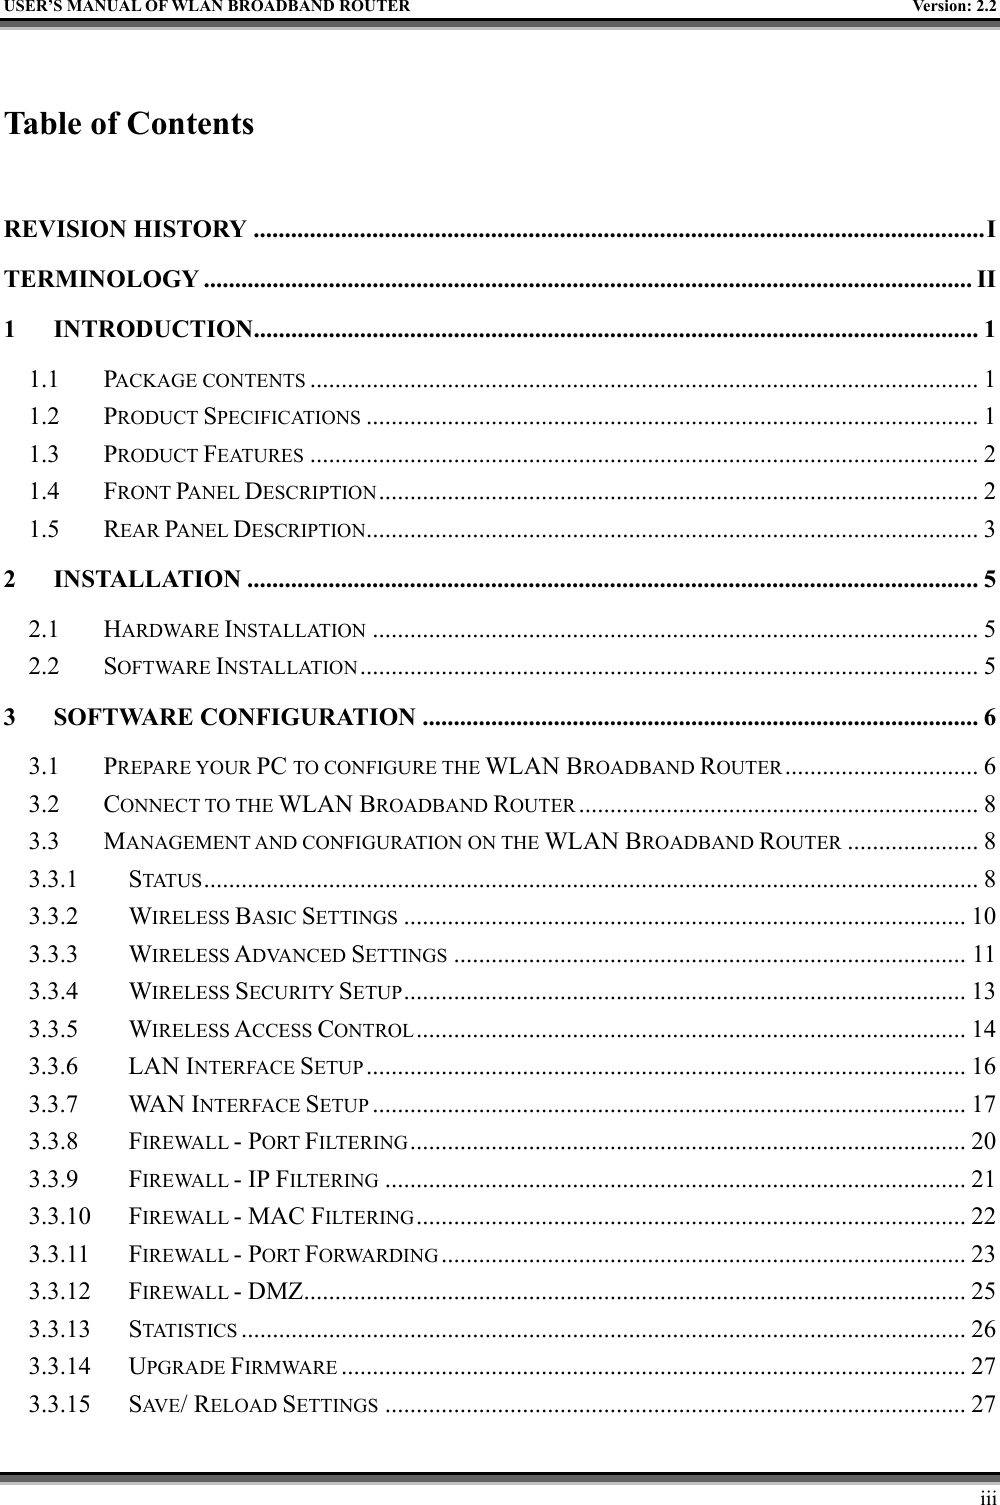   USER’S MANUAL OF WLAN BROADBAND ROUTER    Version: 2.2     iii  Table of Contents  REVISION HISTORY .....................................................................................................................I TERMINOLOGY ........................................................................................................................... II 1 INTRODUCTION....................................................................................................................1 1.1 PACKAGE CONTENTS ........................................................................................................... 1 1.2 PRODUCT SPECIFICATIONS .................................................................................................. 1 1.3 PRODUCT FEATURES ........................................................................................................... 2 1.4 FRONT PANEL DESCRIPTION................................................................................................ 2 1.5 REAR PANEL DESCRIPTION.................................................................................................. 3 2 INSTALLATION ..................................................................................................................... 5 2.1 HARDWARE INSTALLATION ................................................................................................. 5 2.2 SOFTWARE INSTALLATION................................................................................................... 5 3 SOFTWARE CONFIGURATION ......................................................................................... 6 3.1 PREPARE YOUR PC TO CONFIGURE THE WLAN BROADBAND ROUTER ............................... 6 3.2 CONNECT TO THE WLAN BROADBAND ROUTER ................................................................ 8 3.3 MANAGEMENT AND CONFIGURATION ON THE WLAN BROADBAND ROUTER ..................... 8 3.3.1 STATUS ............................................................................................................................ 8 3.3.2 WIRELESS BASIC SETTINGS .......................................................................................... 10 3.3.3 WIRELESS ADVANCED SETTINGS .................................................................................. 11 3.3.4 WIRELESS SECURITY SETUP.......................................................................................... 13 3.3.5 WIRELESS ACCESS CONTROL........................................................................................ 14 3.3.6 LAN INTERFACE SETUP ................................................................................................ 16 3.3.7 WAN INTERFACE SETUP ............................................................................................... 17 3.3.8 FIREWALL - PORT FILTERING......................................................................................... 20 3.3.9 FIREWALL - IP FILTERING ............................................................................................. 21 3.3.10 FIREWALL - MAC FILTERING........................................................................................ 22 3.3.11 FIREWALL - PORT FORWARDING .................................................................................... 23 3.3.12 FIREWALL - DMZ.......................................................................................................... 25 3.3.13 STATISTICS .................................................................................................................... 26 3.3.14 UPGRADE FIRMWARE .................................................................................................... 27 3.3.15 SAV E / RELOAD SETTINGS ............................................................................................. 27 